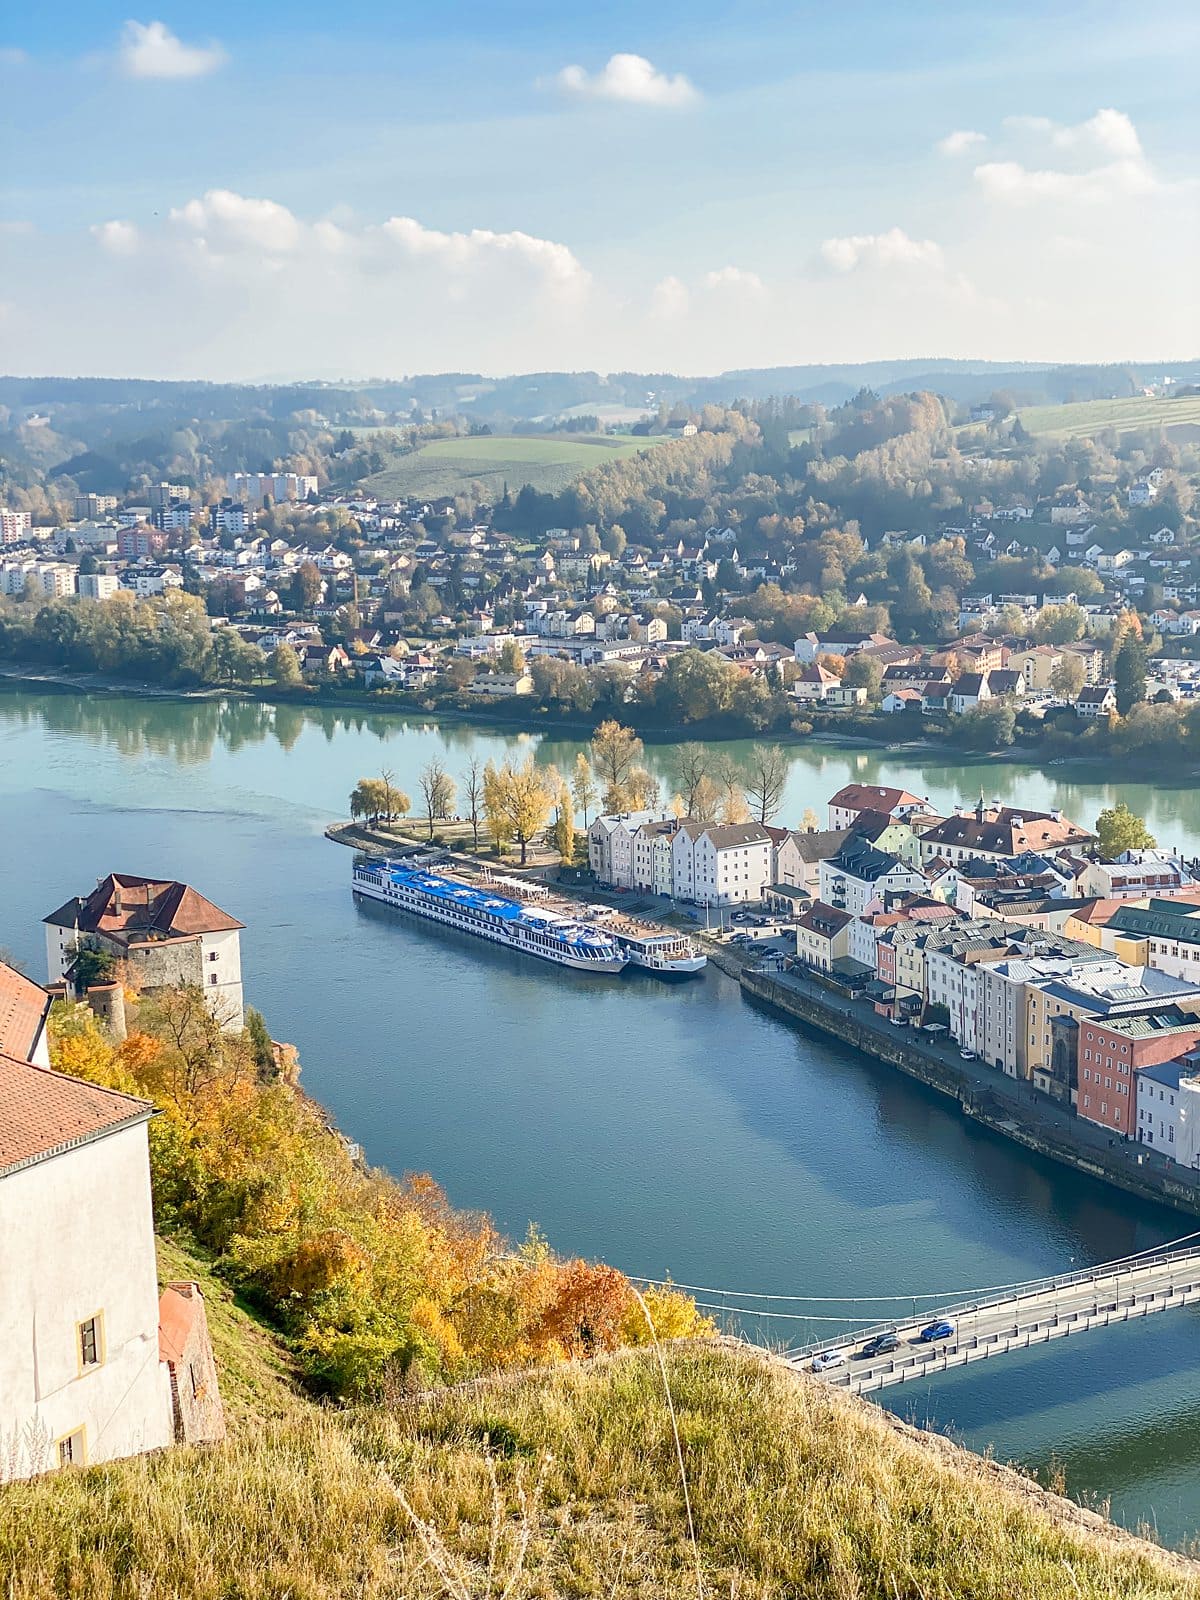 View of Passau, Germany from the top of a fortress looking down on two rivers.